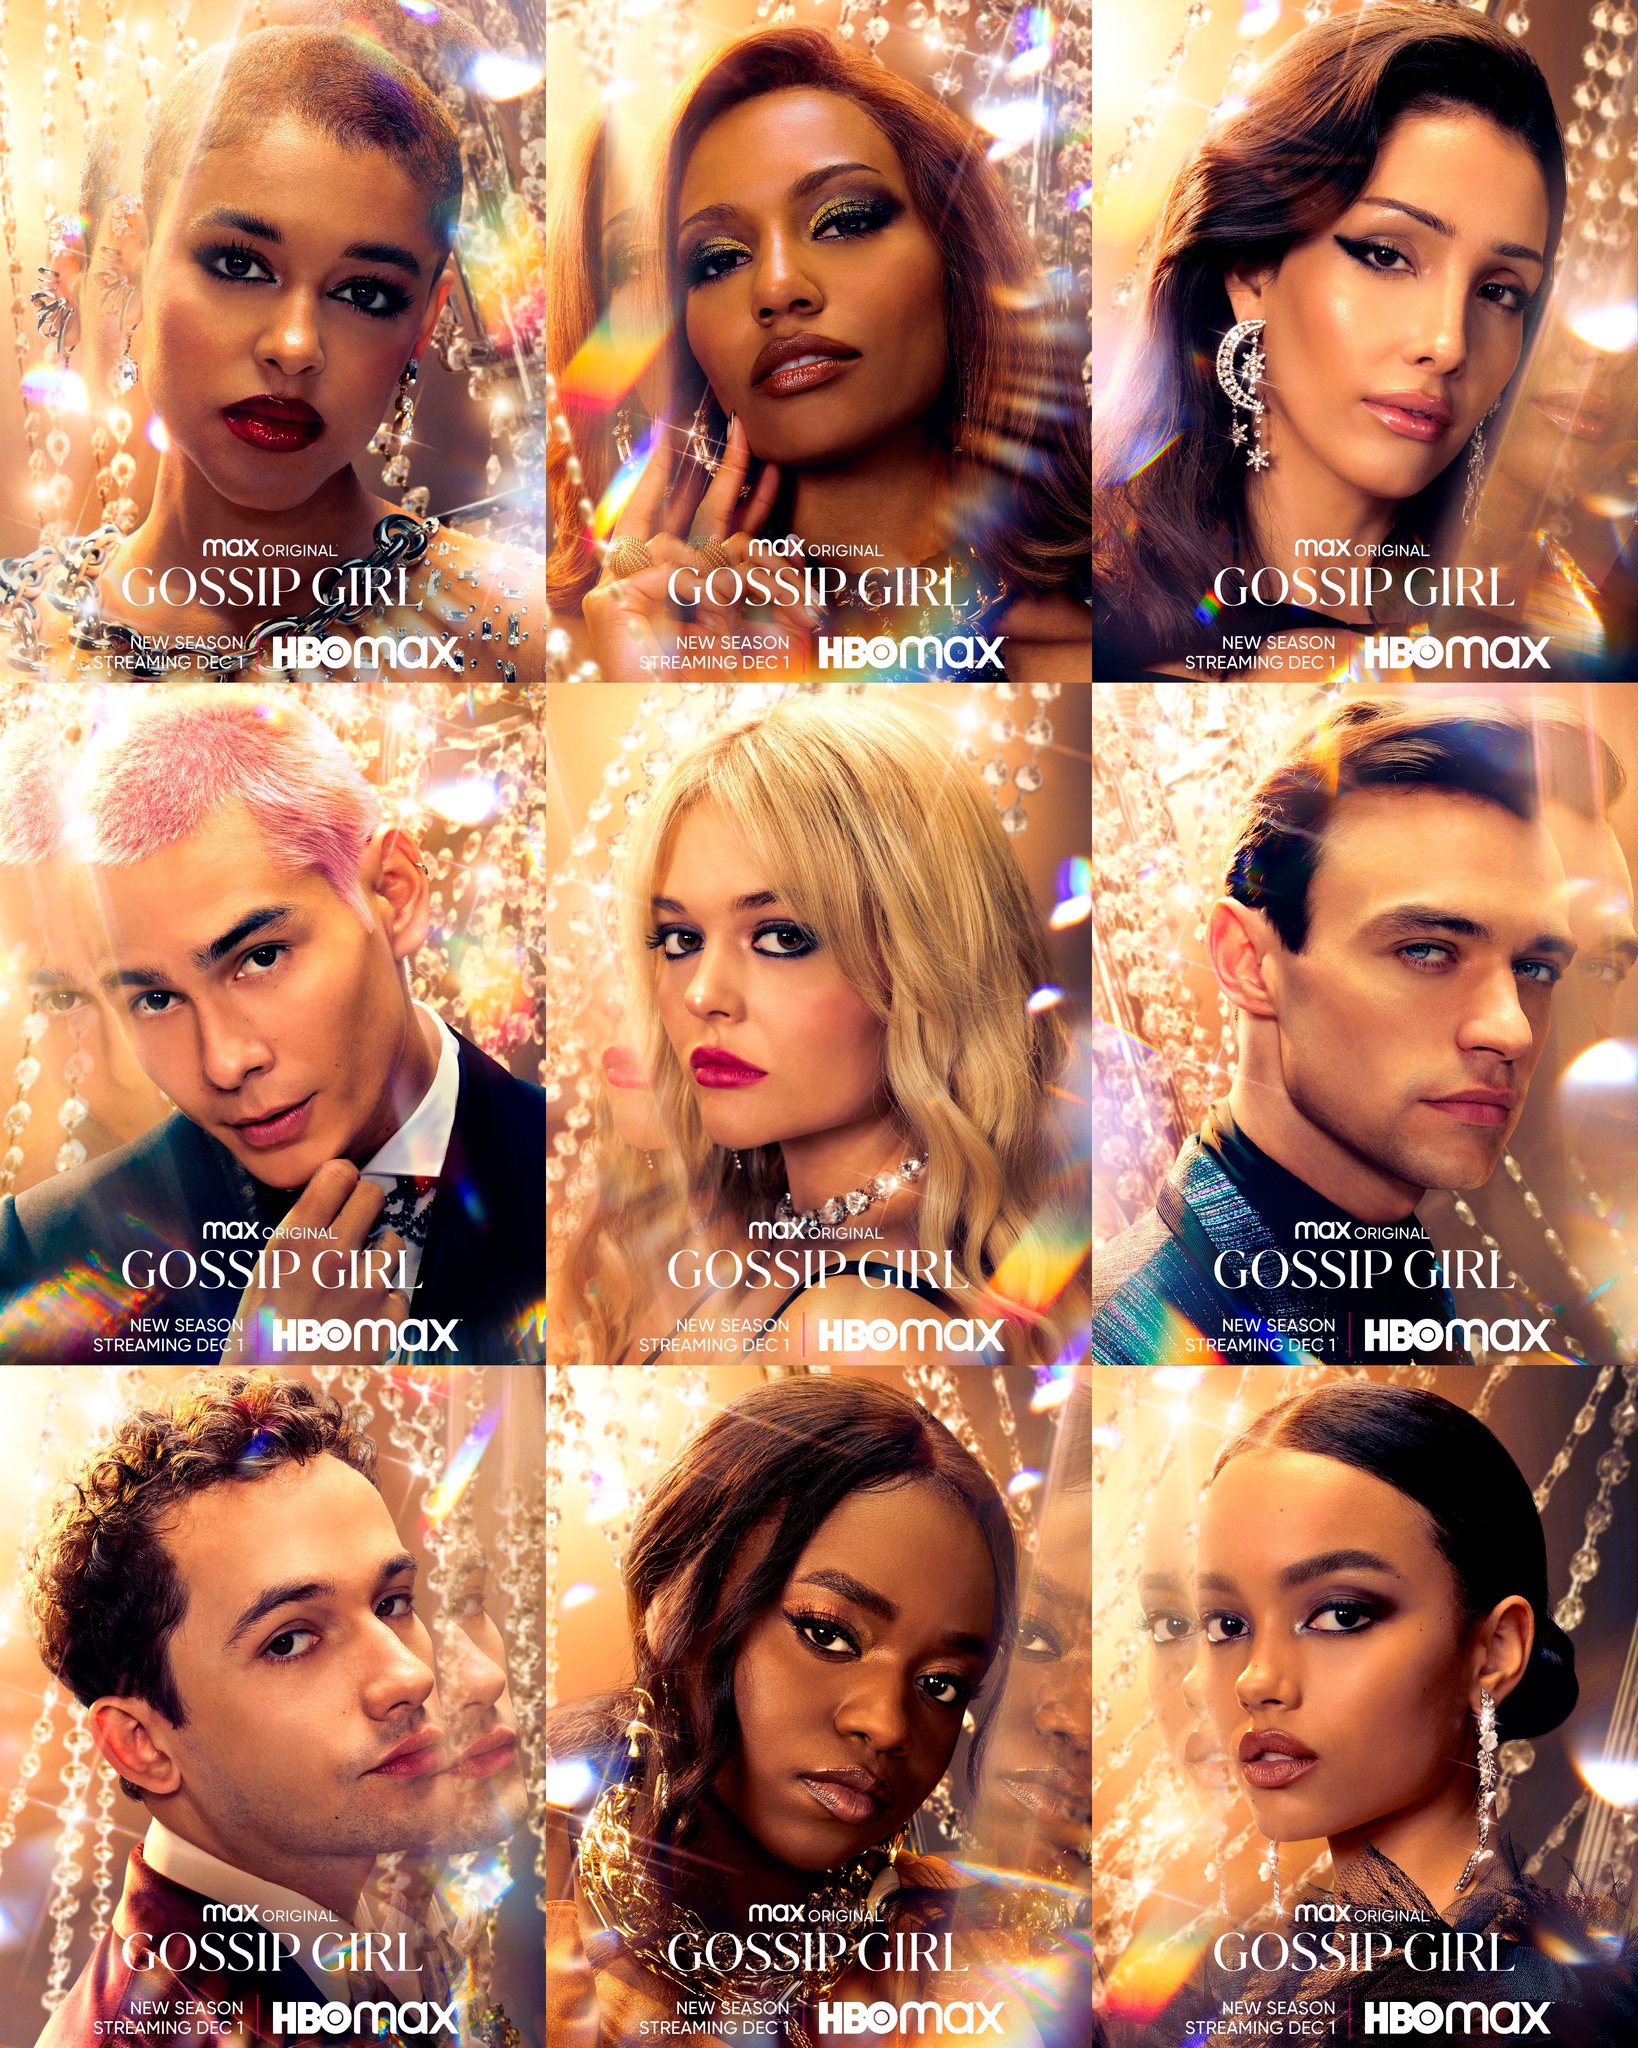 Gossip Girl Season 2 Posters Revealed - SOUND IN THE SIGNALS